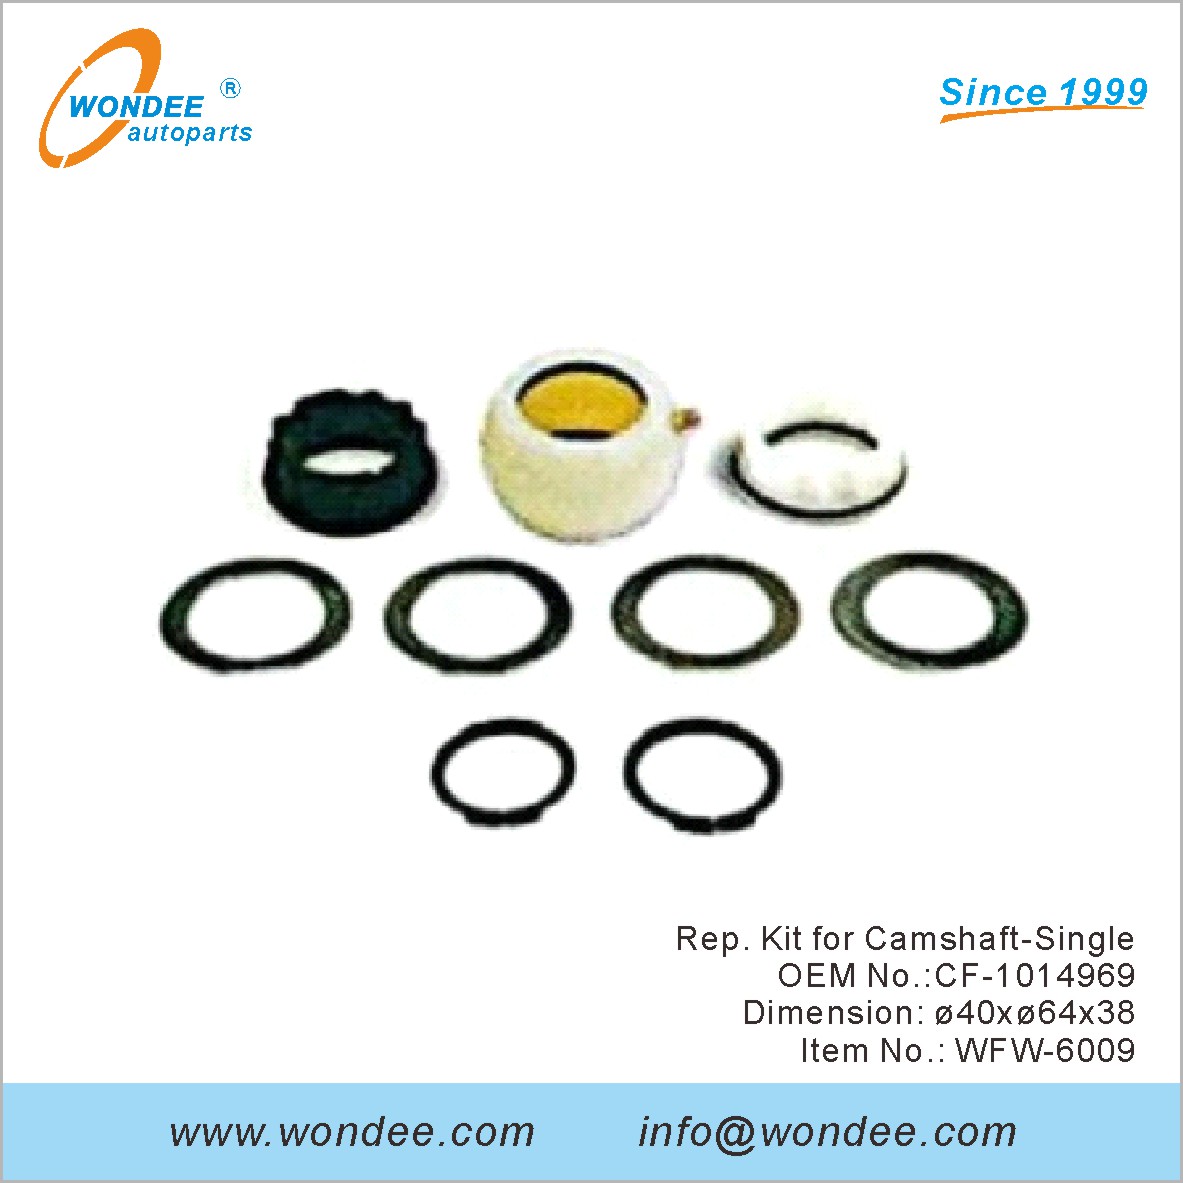 Rep. Kit for Camshaft-Single OEM CF-1014969for FUWA from WONDEE